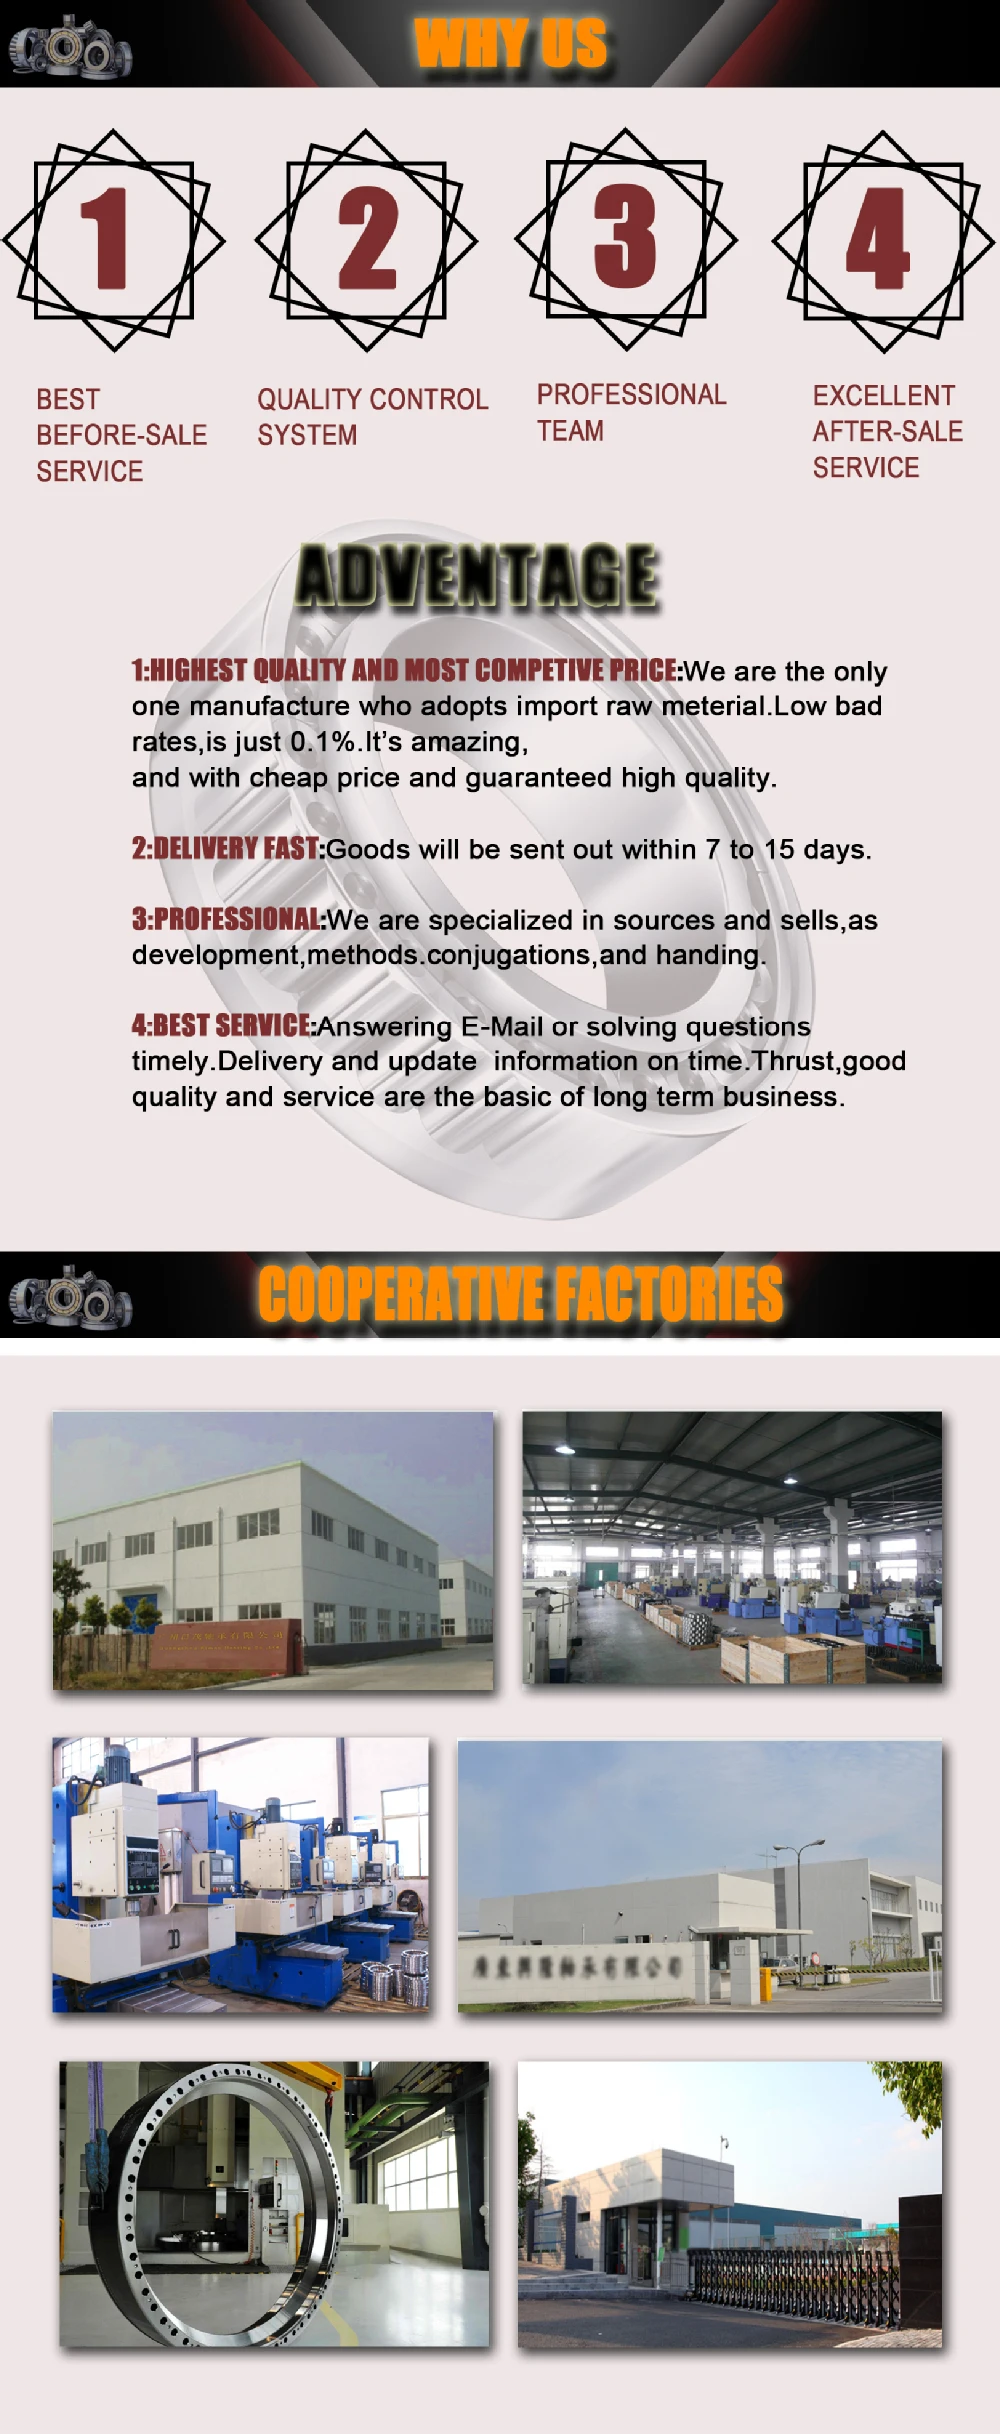 WHY US AND COOPERATE FACTORIES